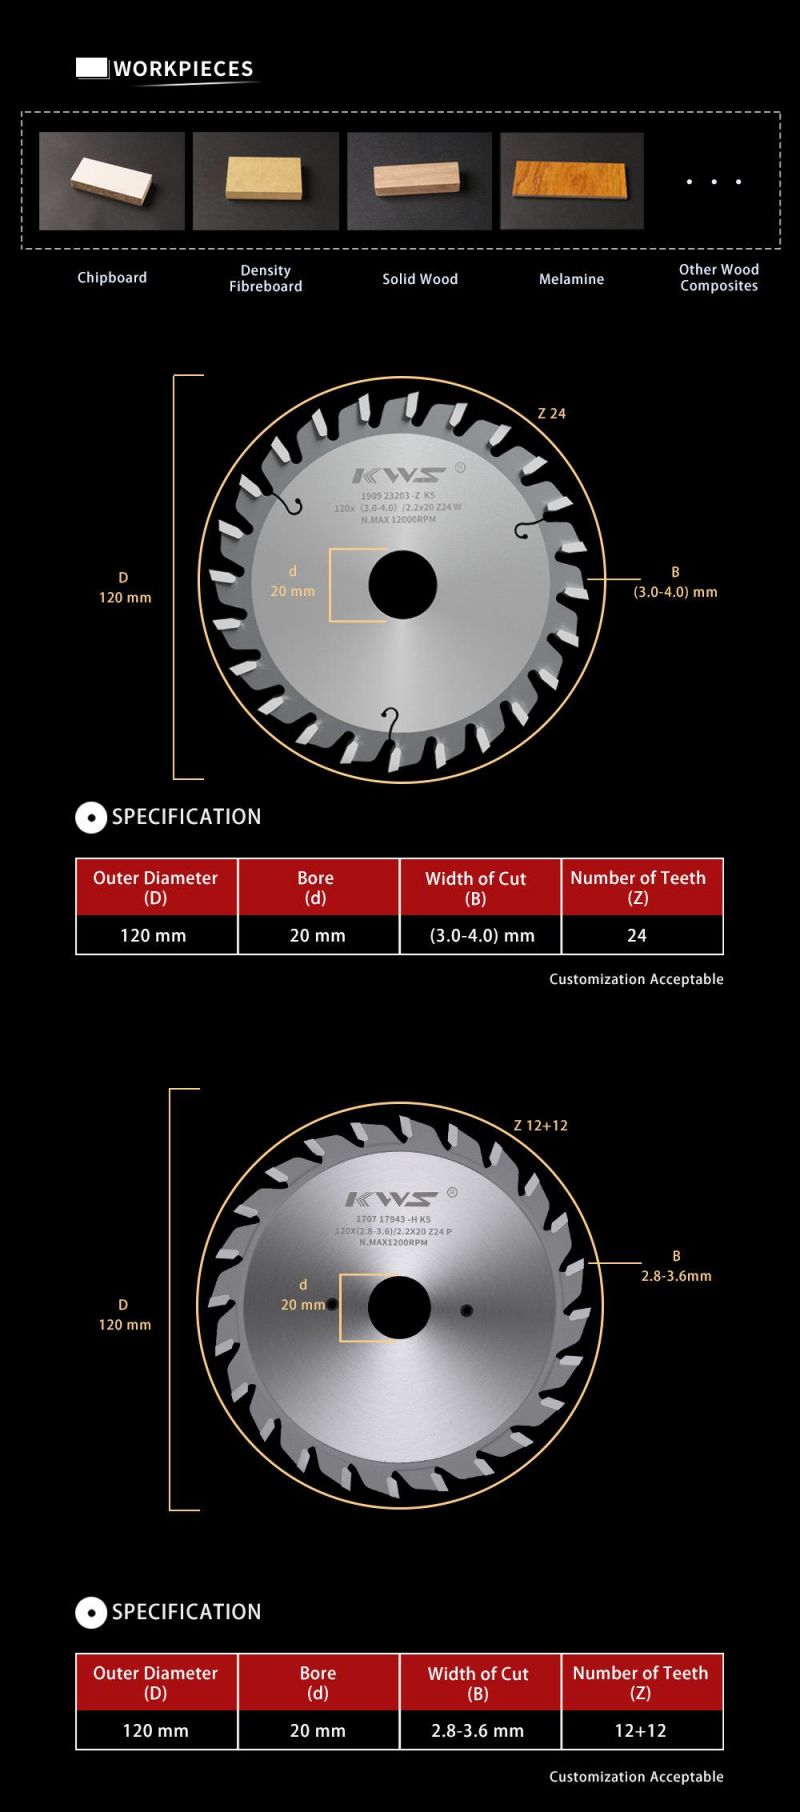 70mm 8+8t Tct Adjustable Scoring Circular Saw Blade for Laminated Panels MDF Chipboard Fireproof Materials